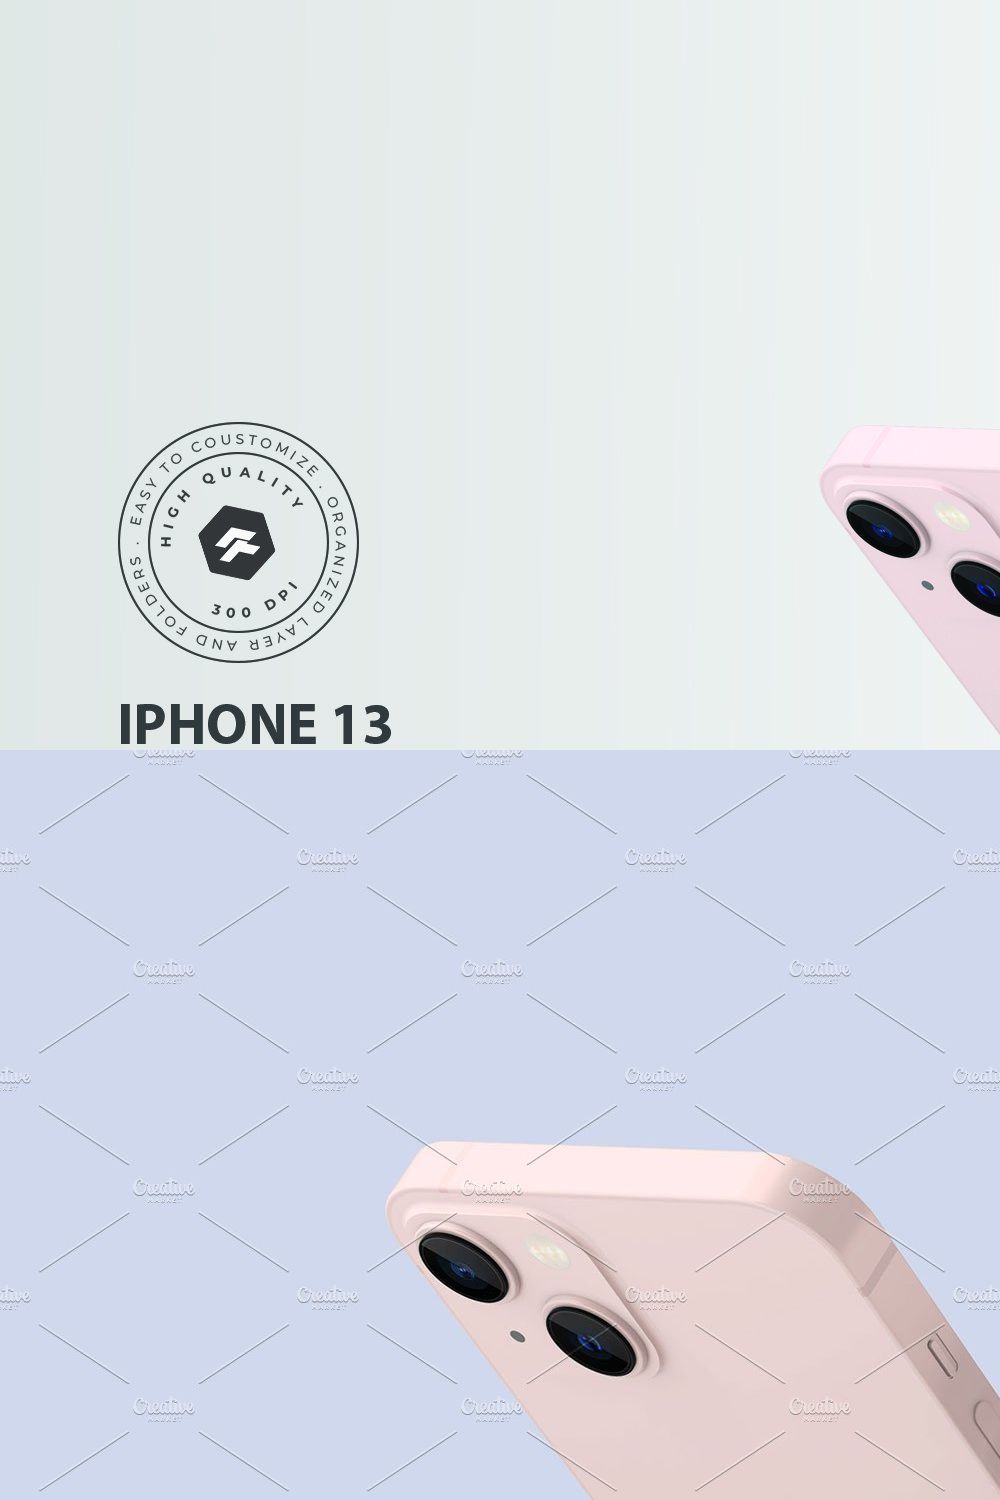 Iphone 13 - Mockup vol.01 pinterest preview image.